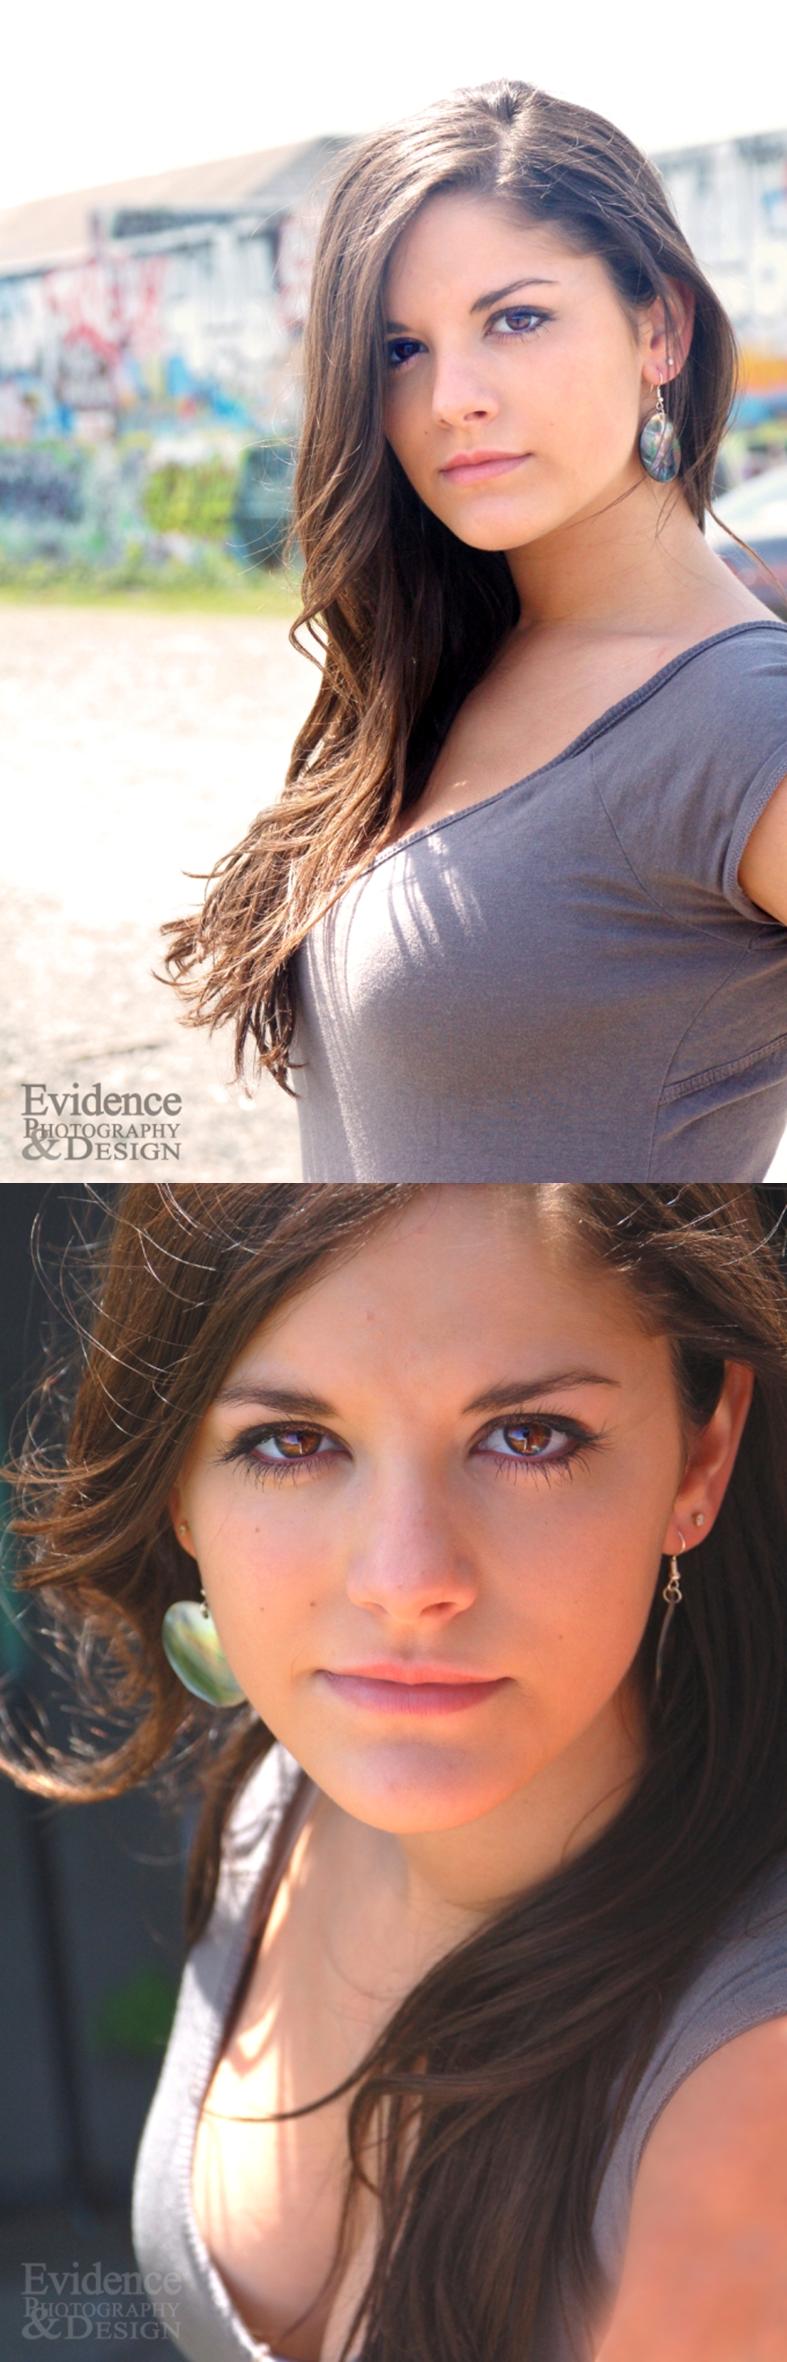 Female model photo shoot of Evidence Photography and Lindsey Jamieson in Seattle